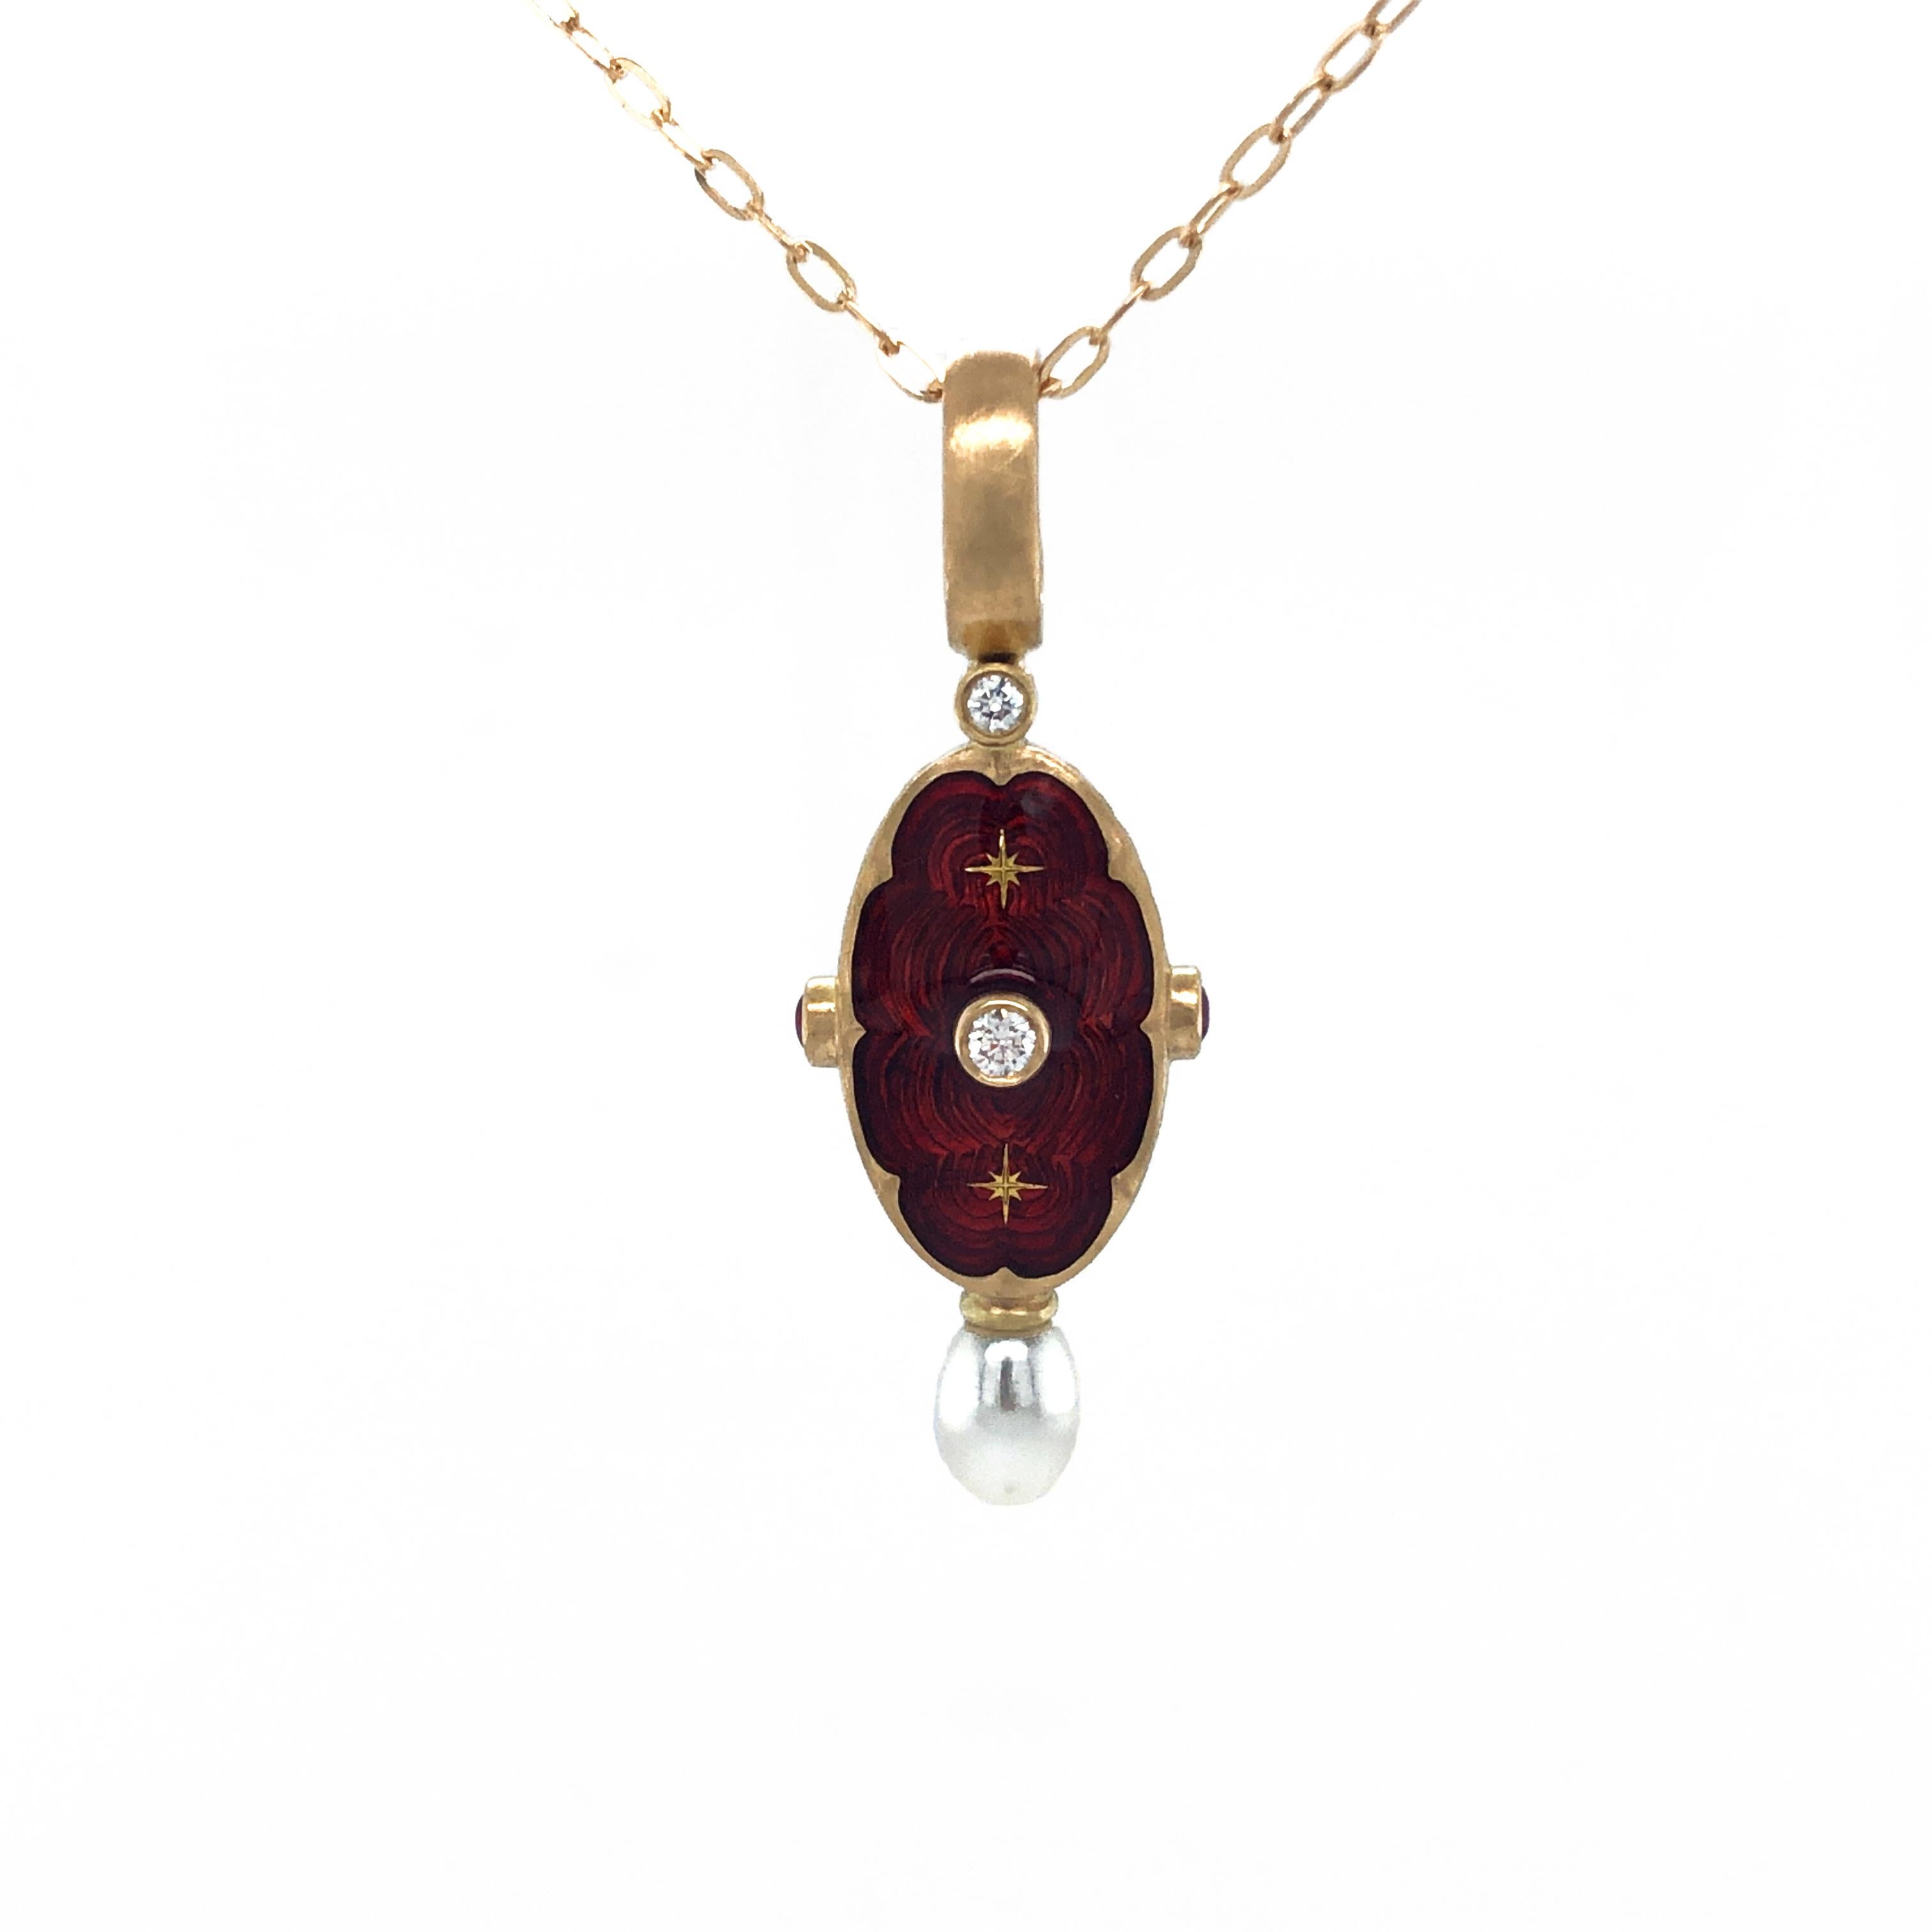 Victor Mayer oval pendant necklace 18k yellow gold, red vitreous guilloche enamel, 2 diamonds, total 0.04 ct G VS, brillant cut, 2 Rubies, 1 sweet water Pearl, 2 Gold Star Paillons

About the creator Victor Mayer
Victor Mayer is internationally